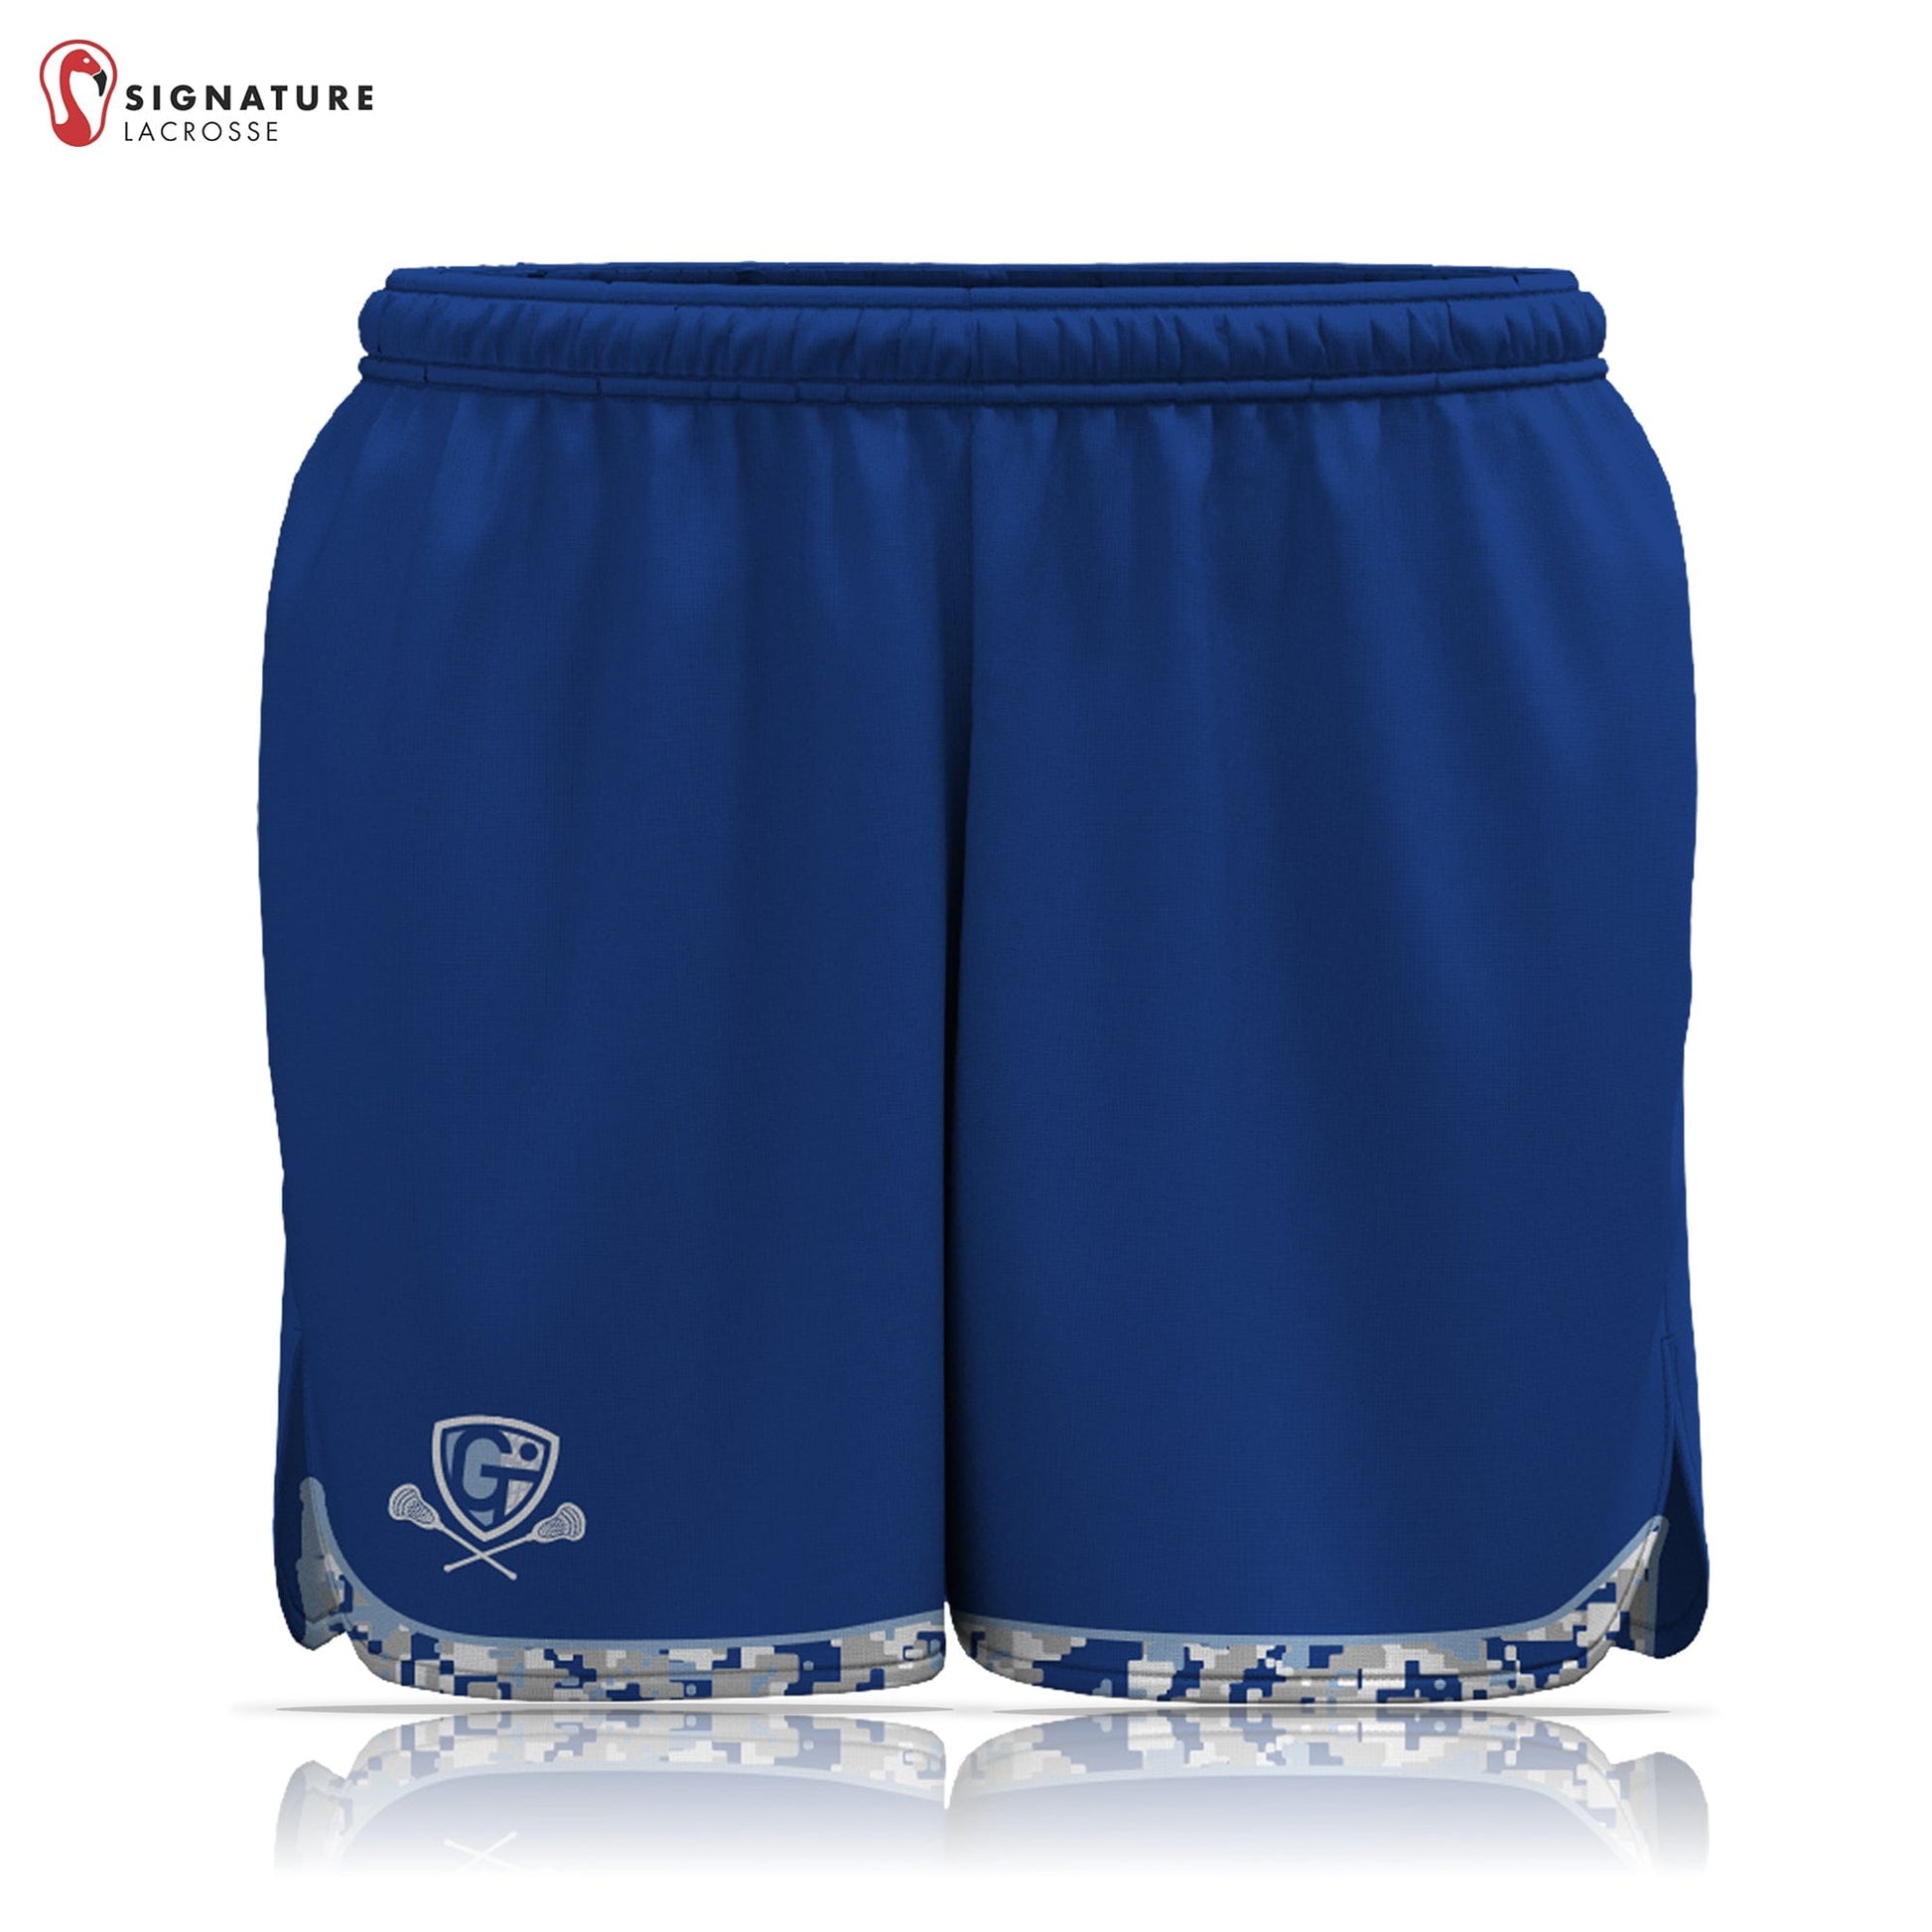 Georgetown-Triton Youth Lacrosse Women's Player Game Shorts: 5-6 Signature Lacrosse